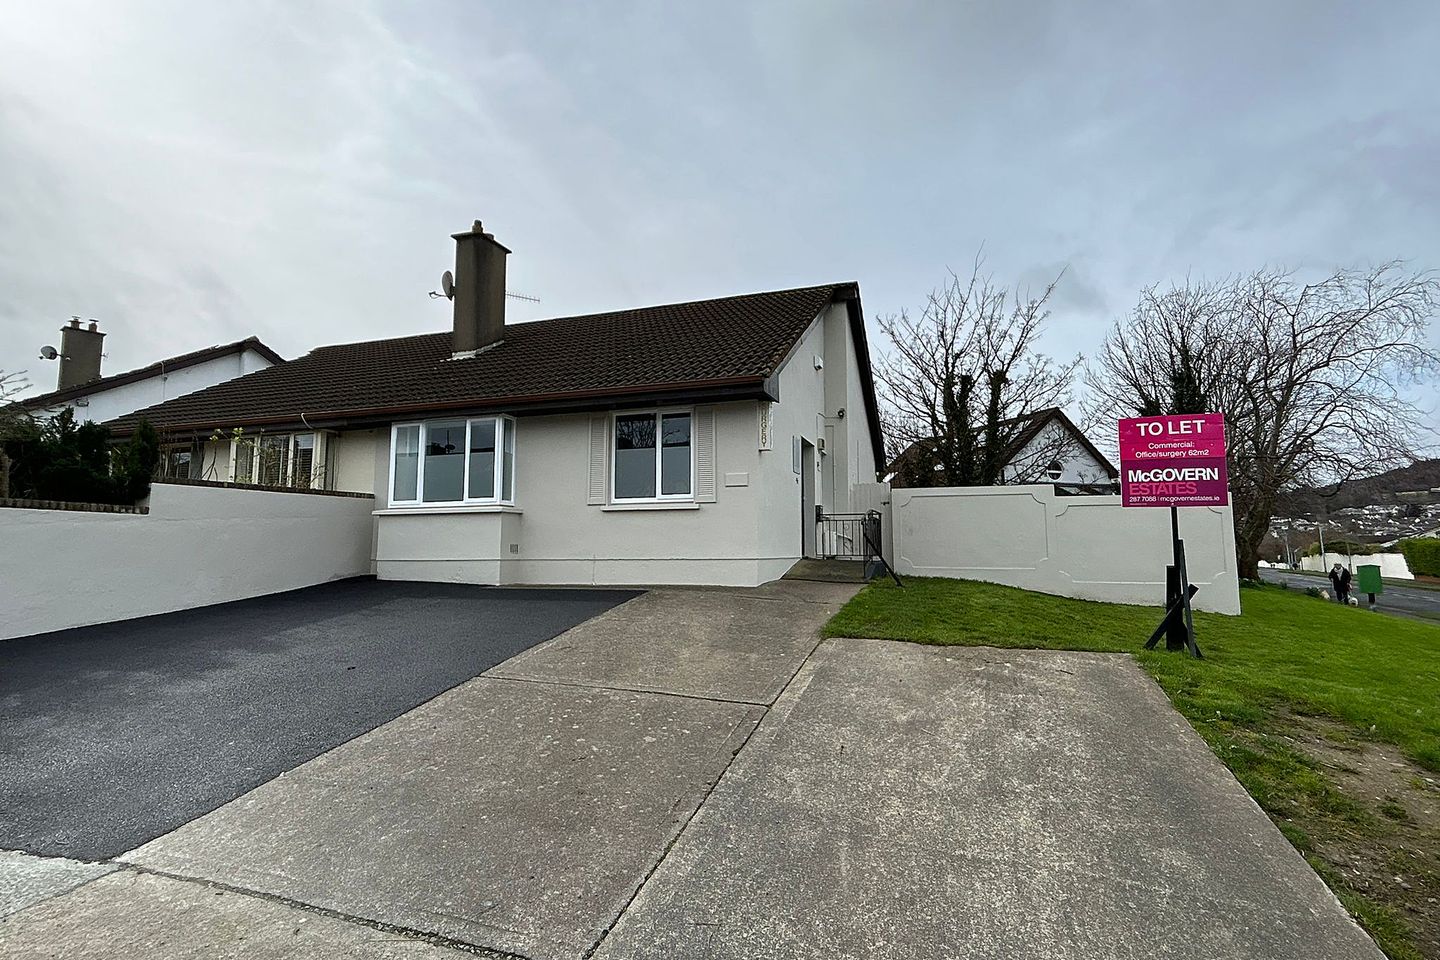 96 Heathervue (Formerly Carrig Clinic), Greystones, Co. Wicklow